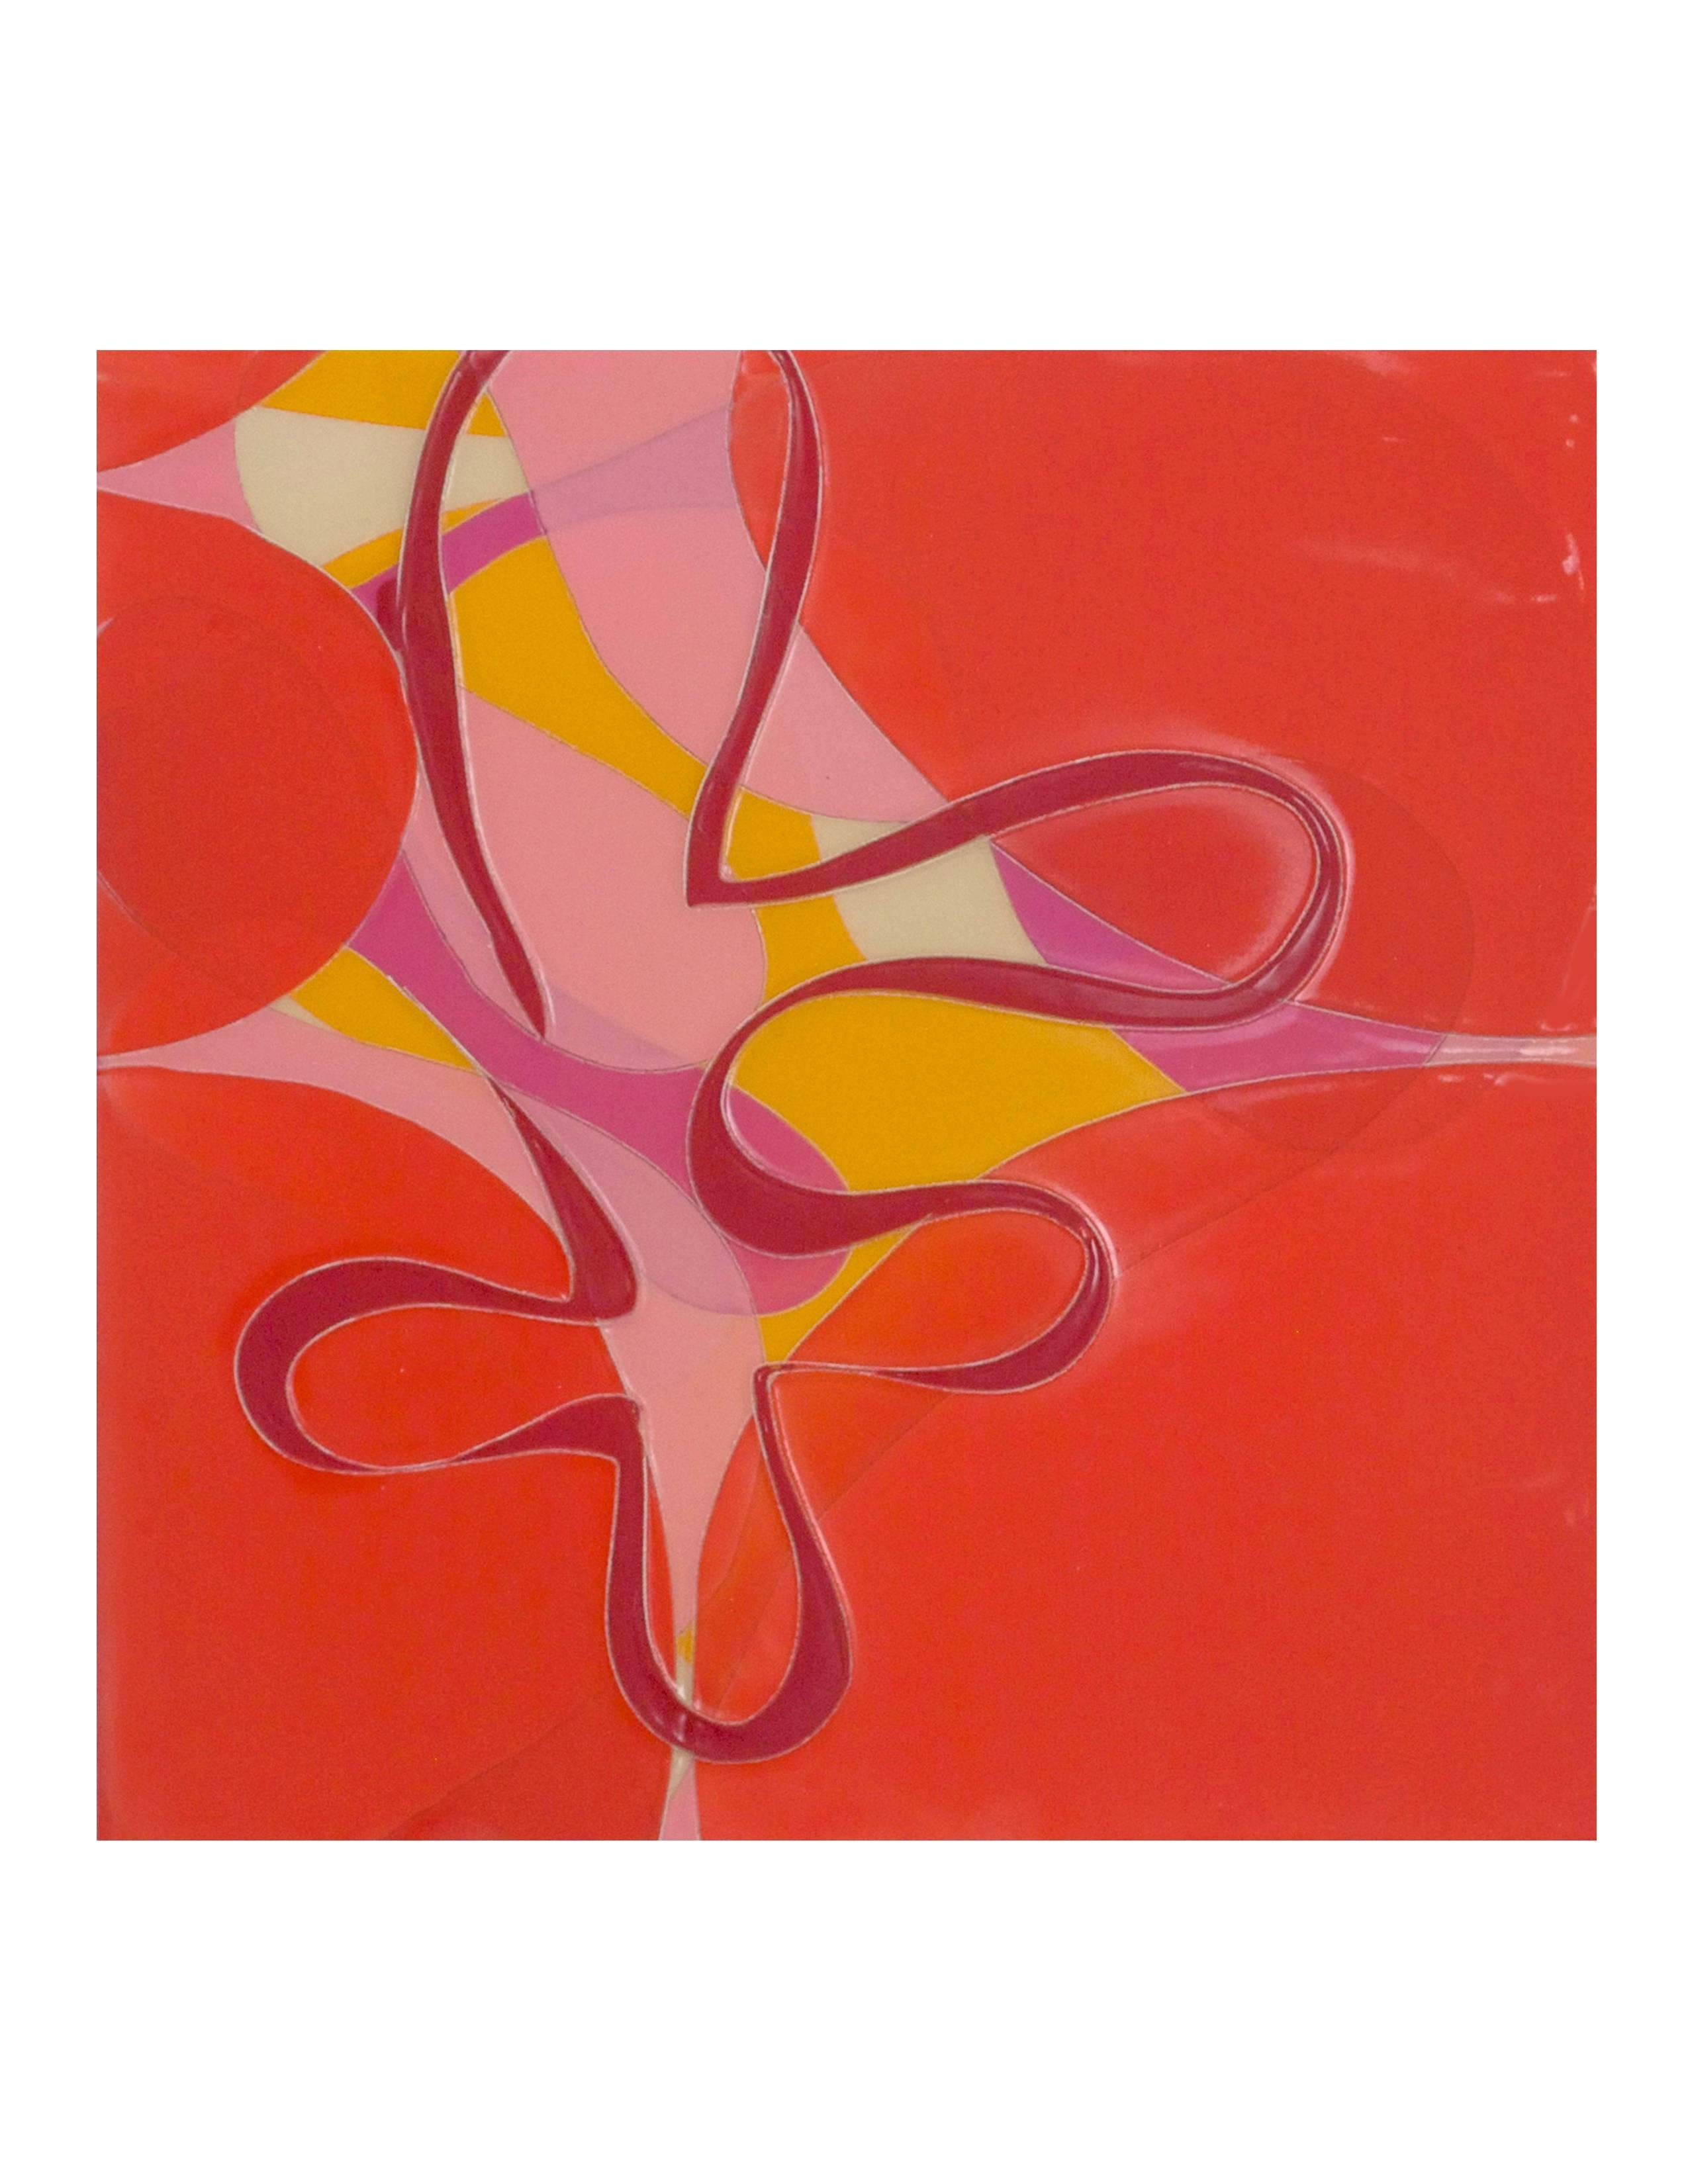 Material: Acrylic &amp; Polyurethane on Panel
Dimensions: 24&quot; x 24&quot;

Born in Columbus, Ohio in 1968, Ronald Johnson received an MFA from Virginia Commonwealth University in 2003.  Since then, Johnson has exhibited widely both nationally